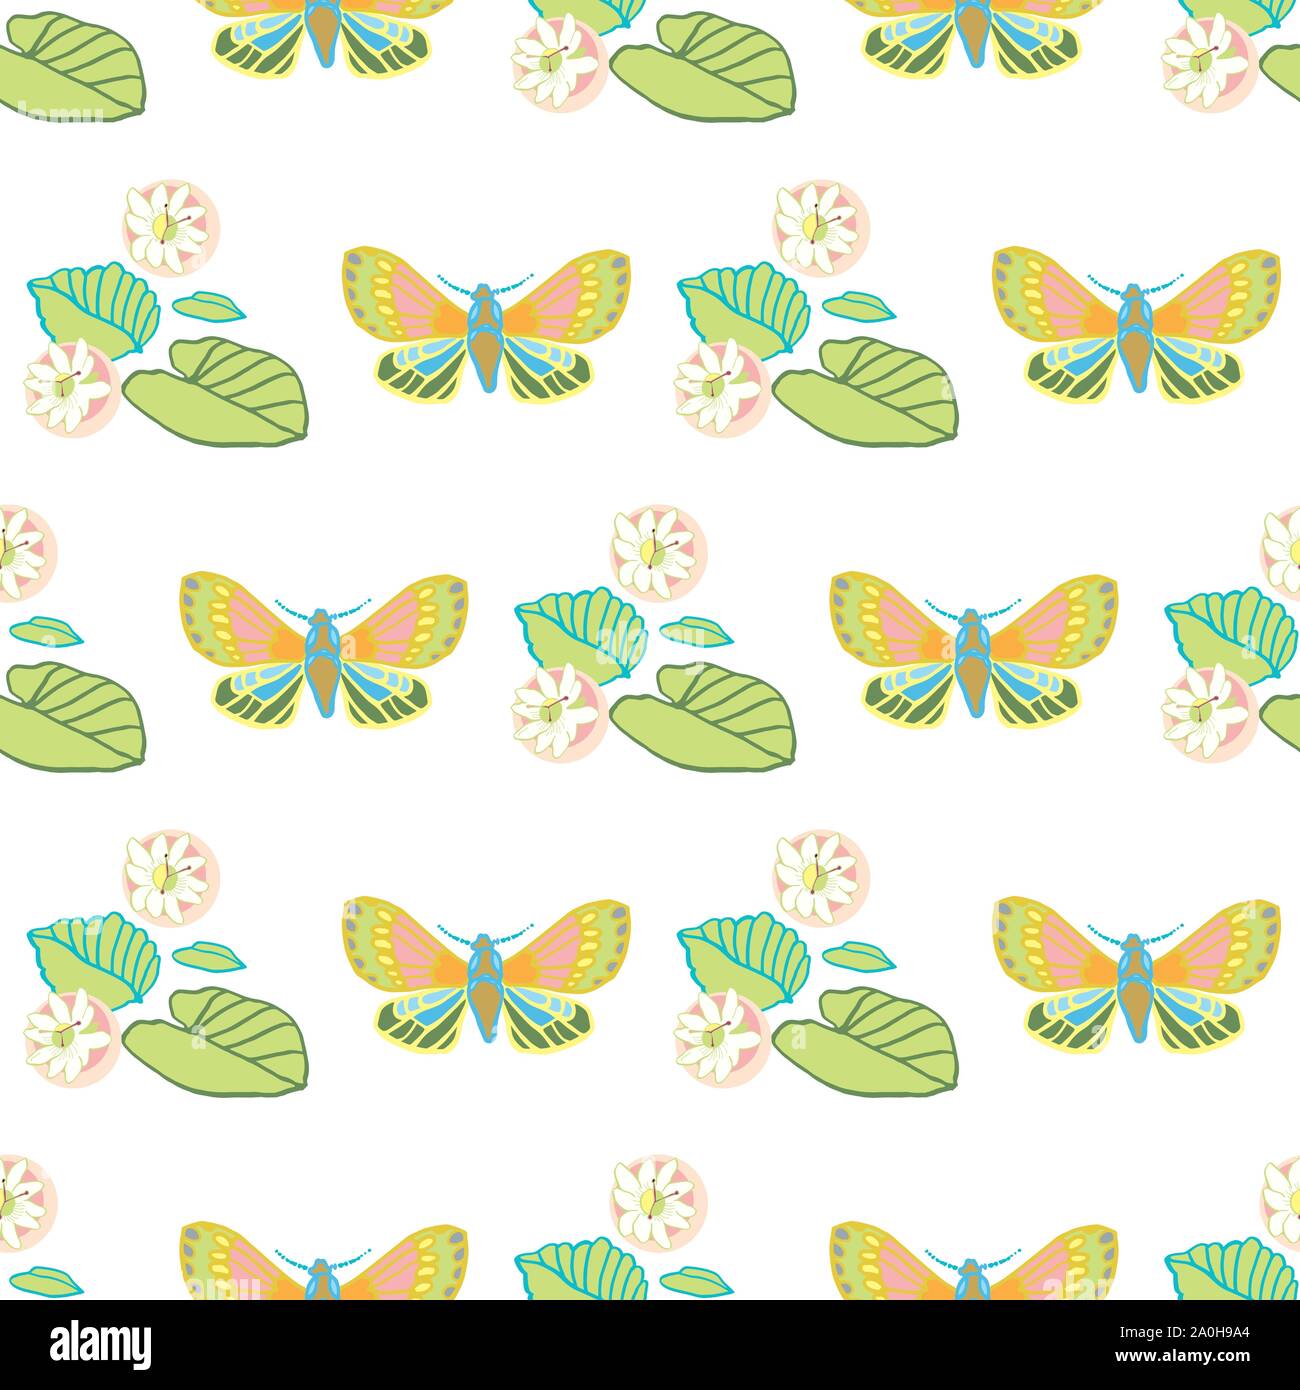 Pastel exotic jungle flamingo geometric seamless summer pattern. Boanical leaf and butterfly in pastel green and pink tones. For fashion, fabric, wallpaper, packaging design, stationary. Stock Vector